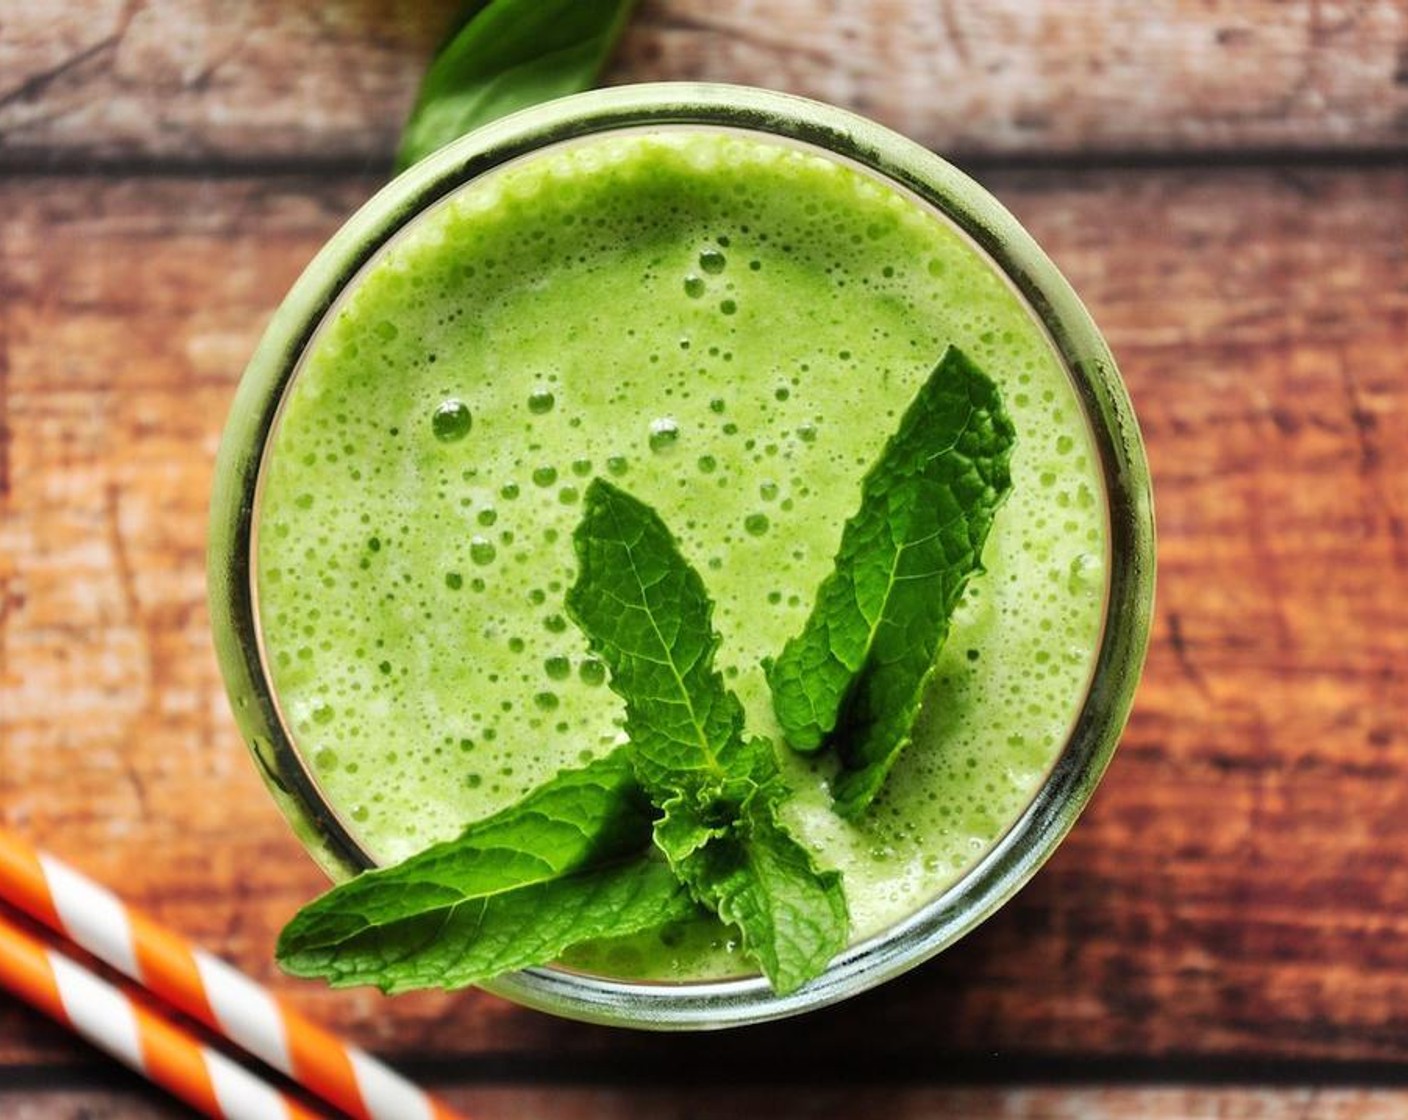 step 1 In a blender, add Coconut Water (1 cup), Kale (1/2 cup), Fresh Spinach (1/2 cup), and Fresh Mint Leaves (6). Add Greek Yogurt (1/4 cup), then Frozen Pineapple (1 cup). Top with Stevia (1/2 pckg) and Chia Seeds (1 tsp) and blend on high speed until smooth. Pour into a glass and enjoy!